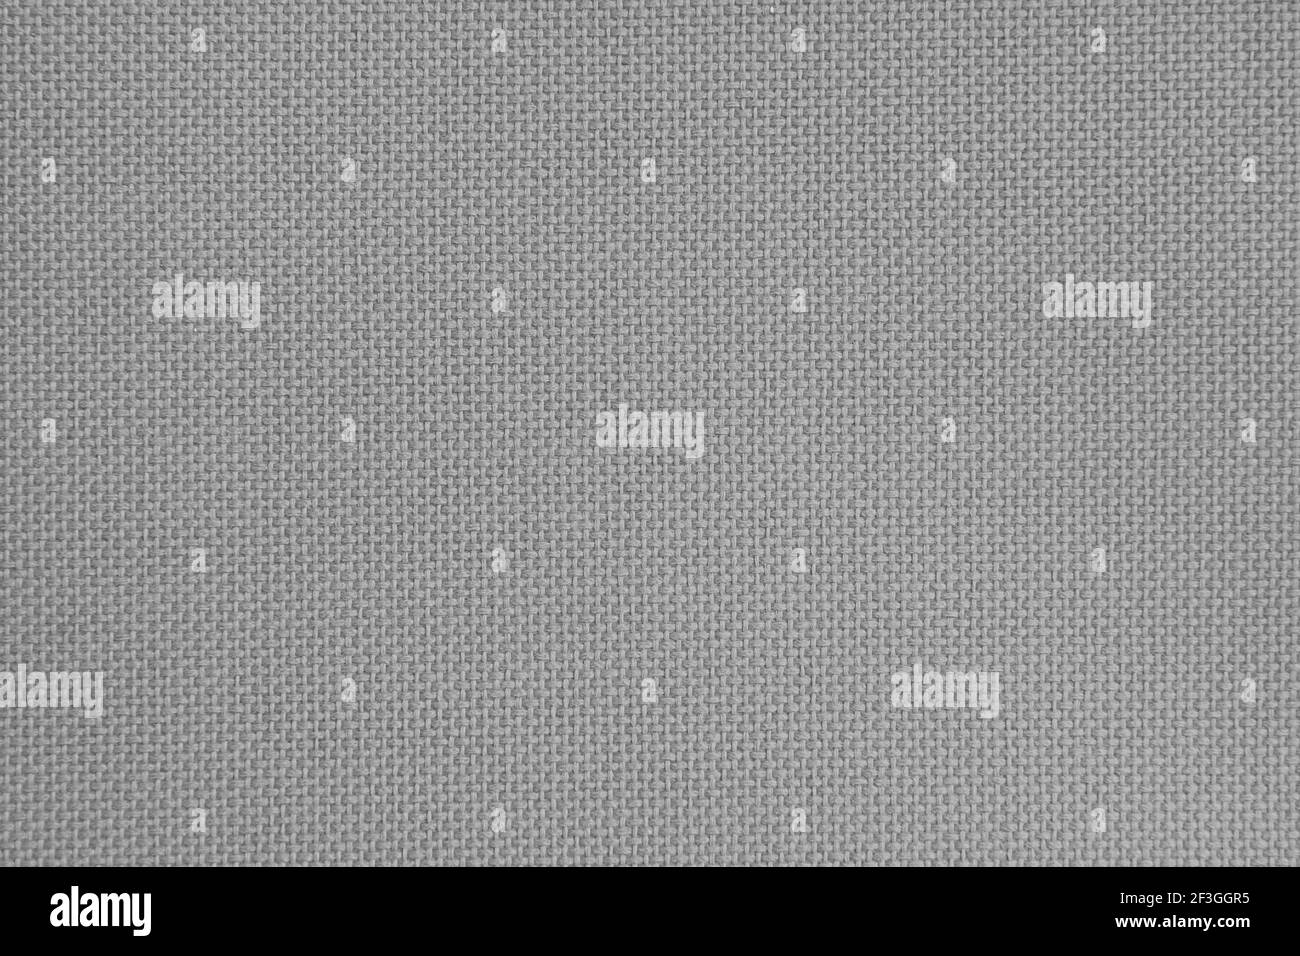 Fabric texture Black and White Stock Photos & Images - Alamy